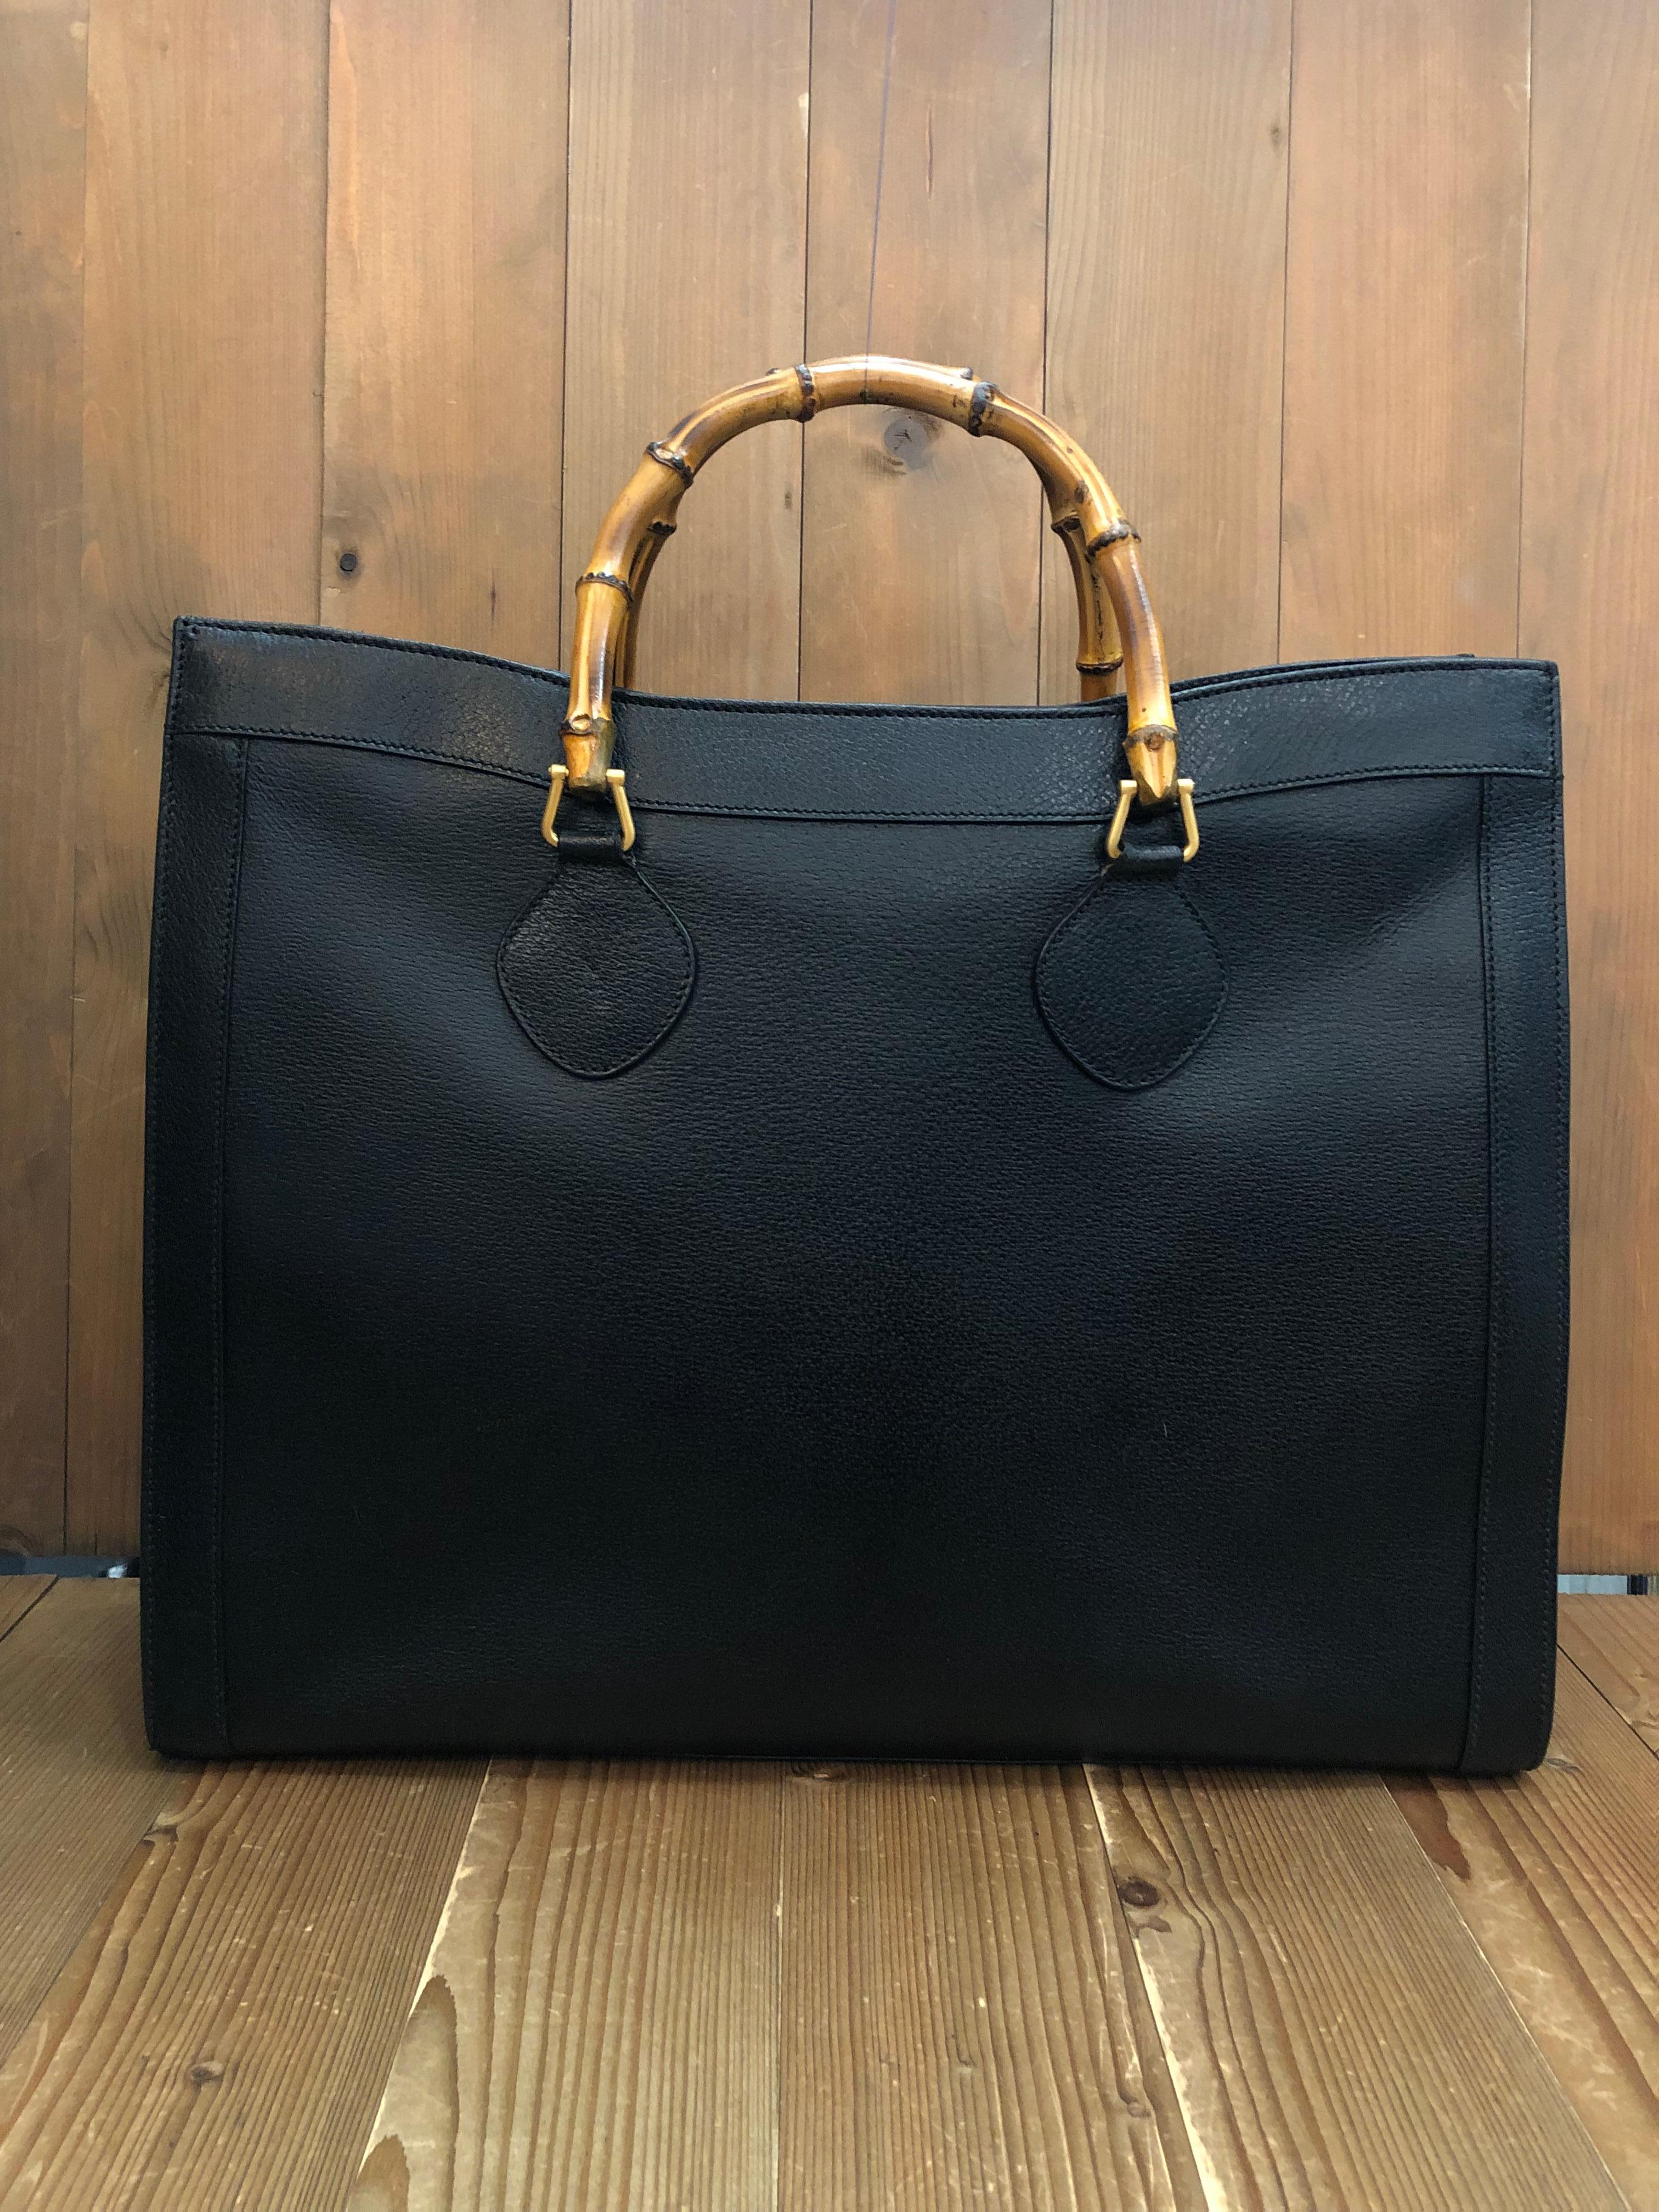 This vintage Gucci Diana Bamboo tote is crafted of pigskin leather in black featuring matte gold toned hardware and bamboo handles. Top flap magnetic snap closure opens a new interior in black featuring two main open compartments and one middle